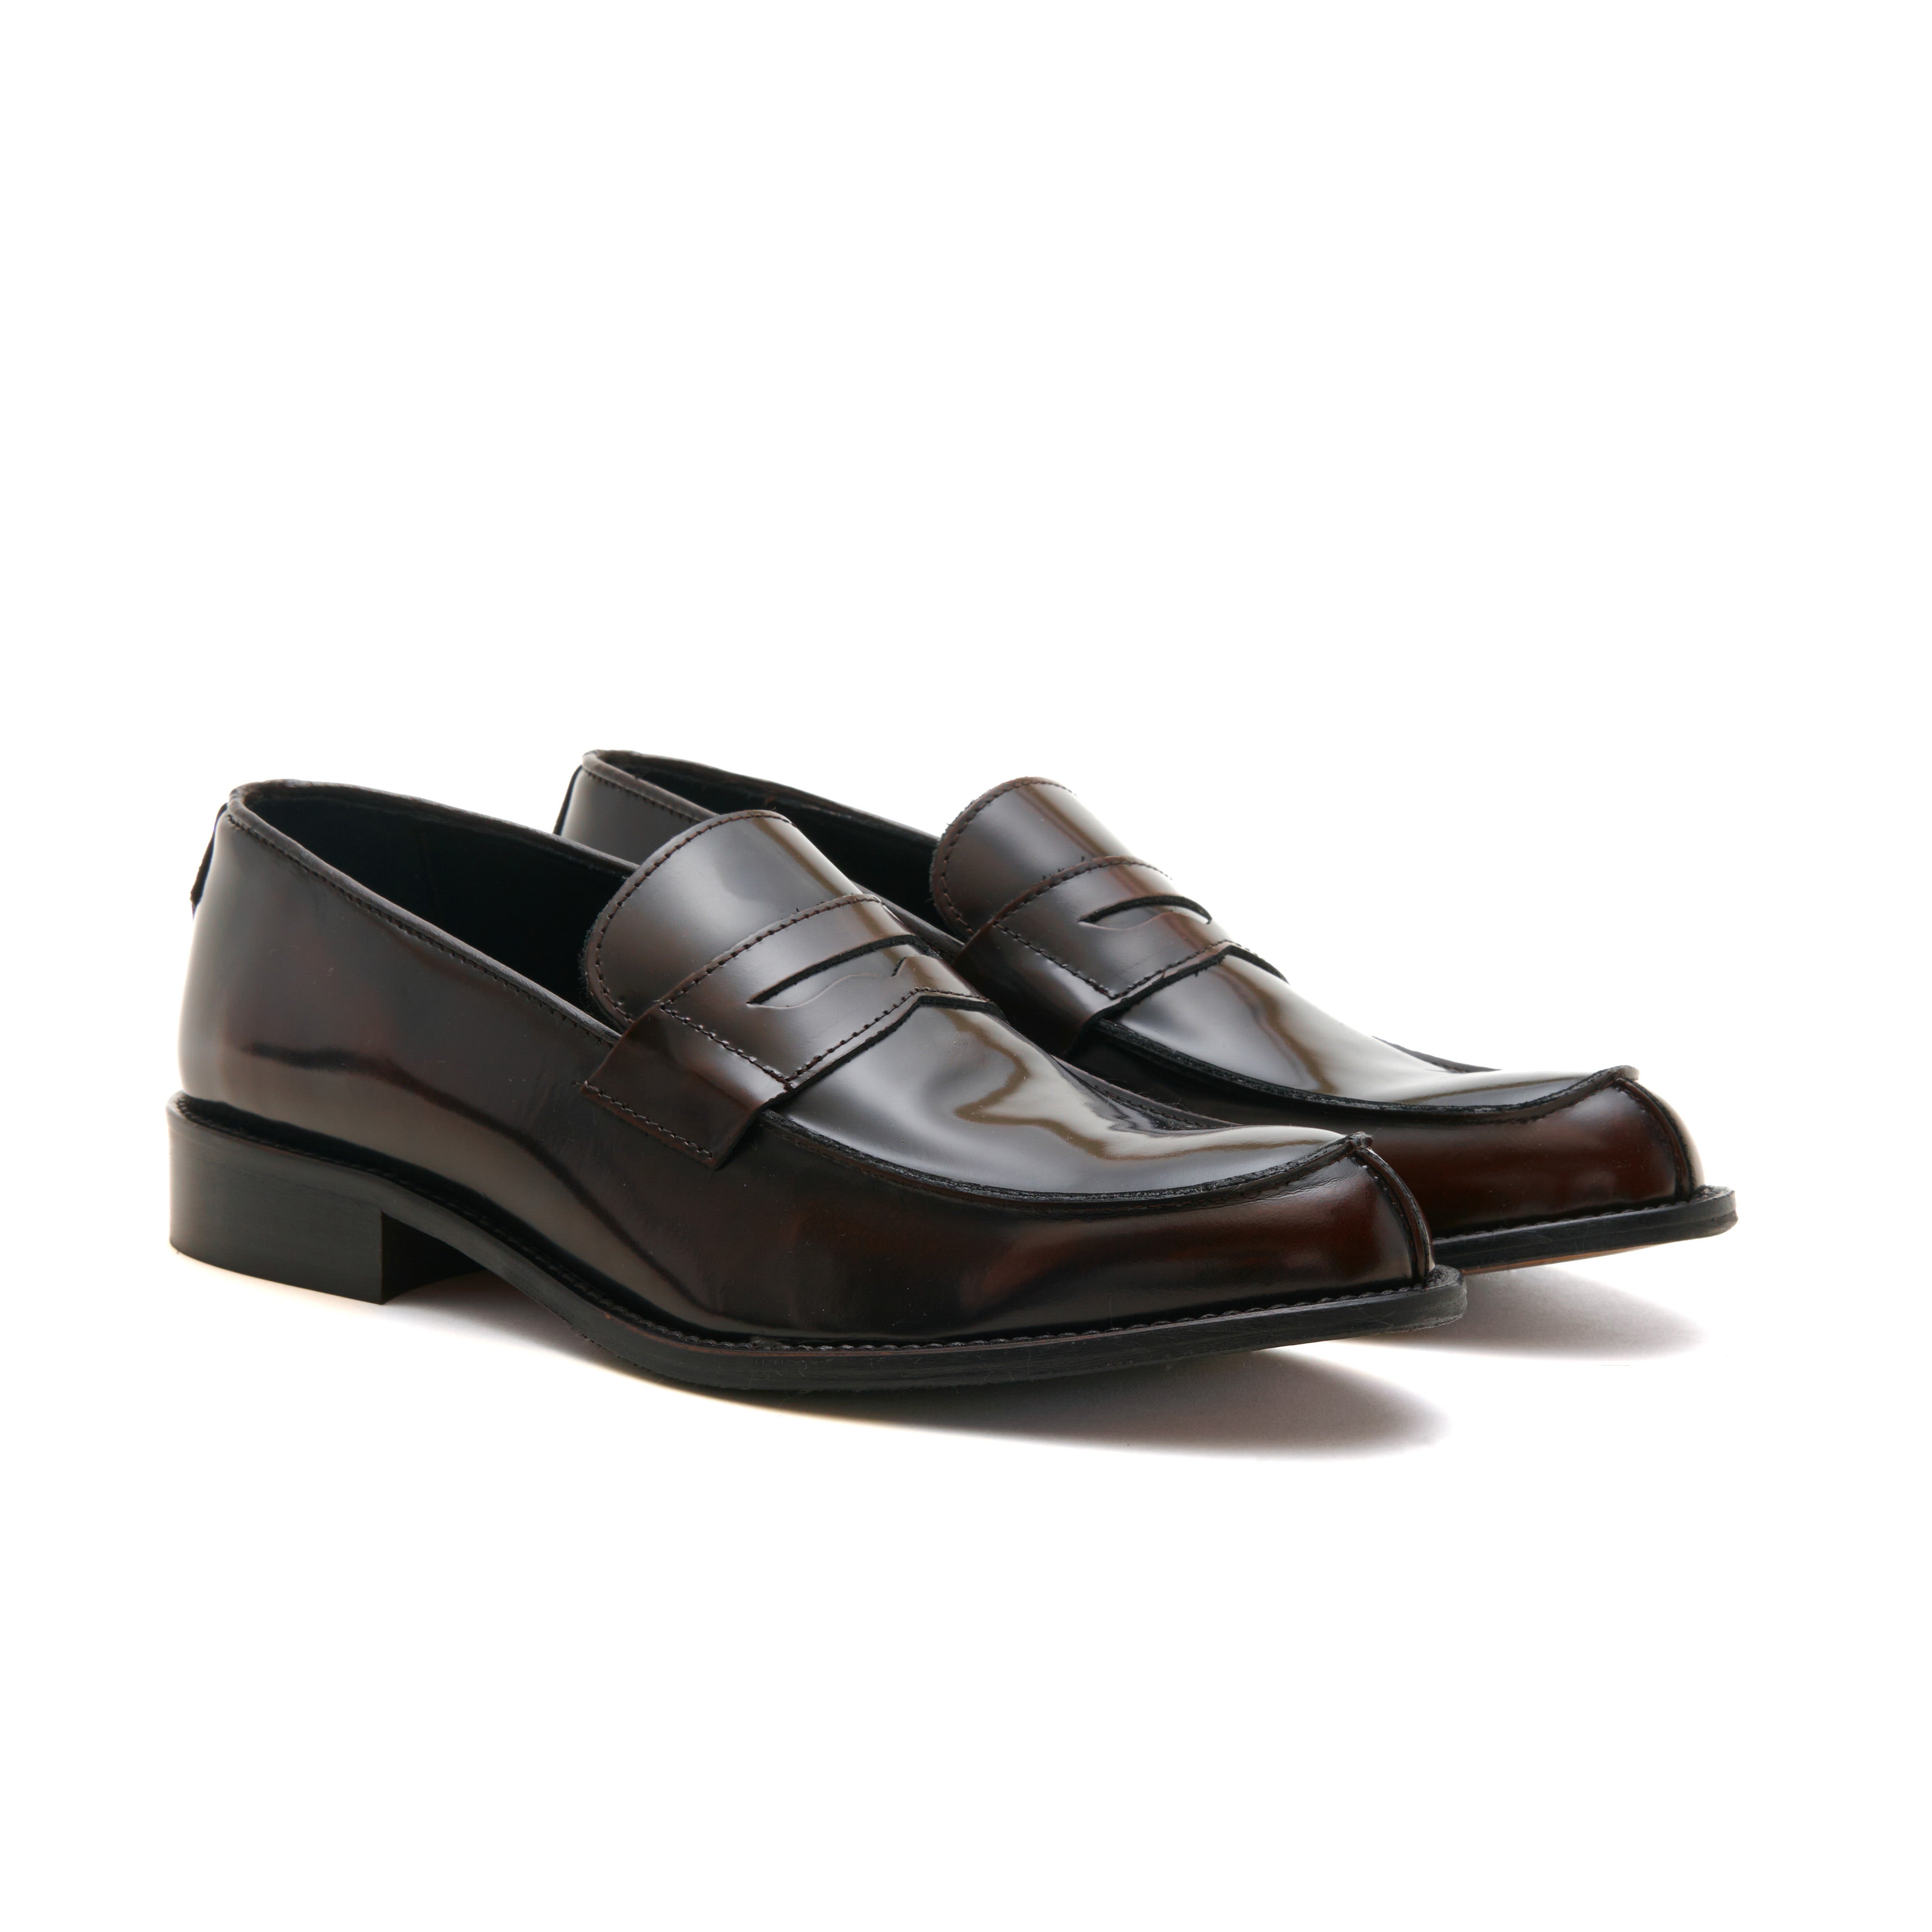 Moro Moccasin Shoes Leather Bottom